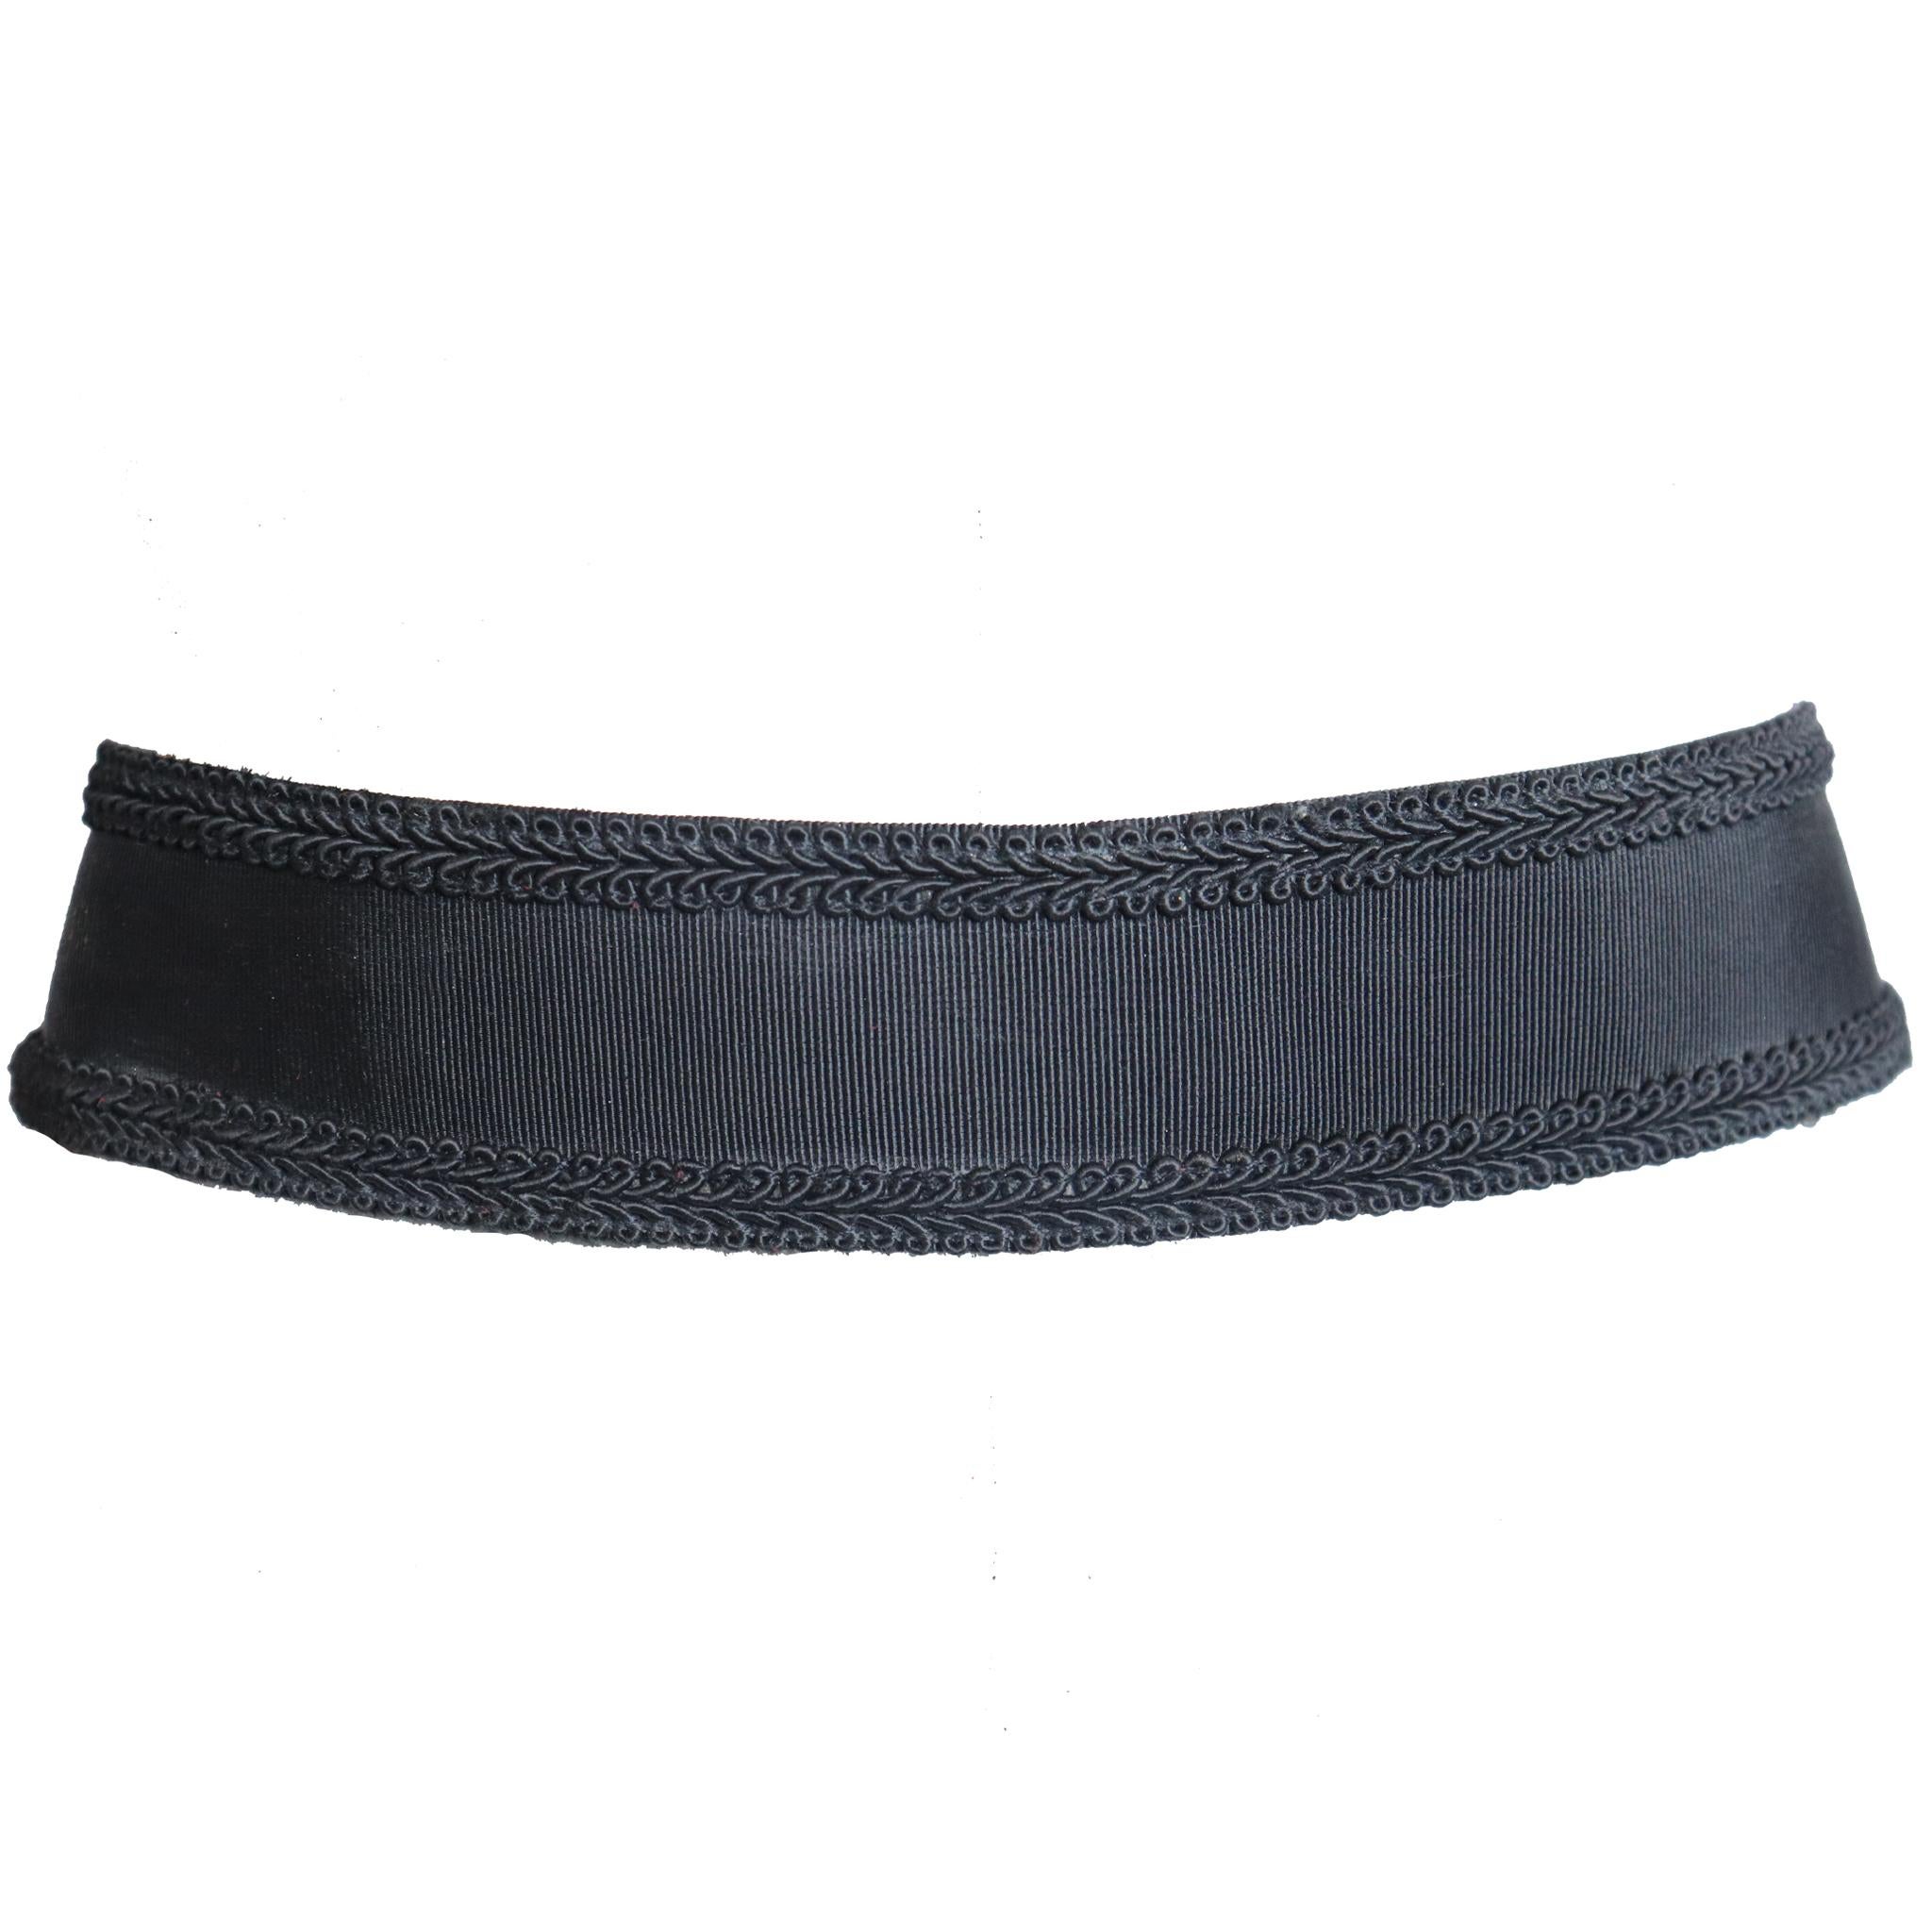 DonnaKaran Black Grosgrain Belt with Braided Trim Circa 1990s In Excellent Condition For Sale In Los Angeles, CA